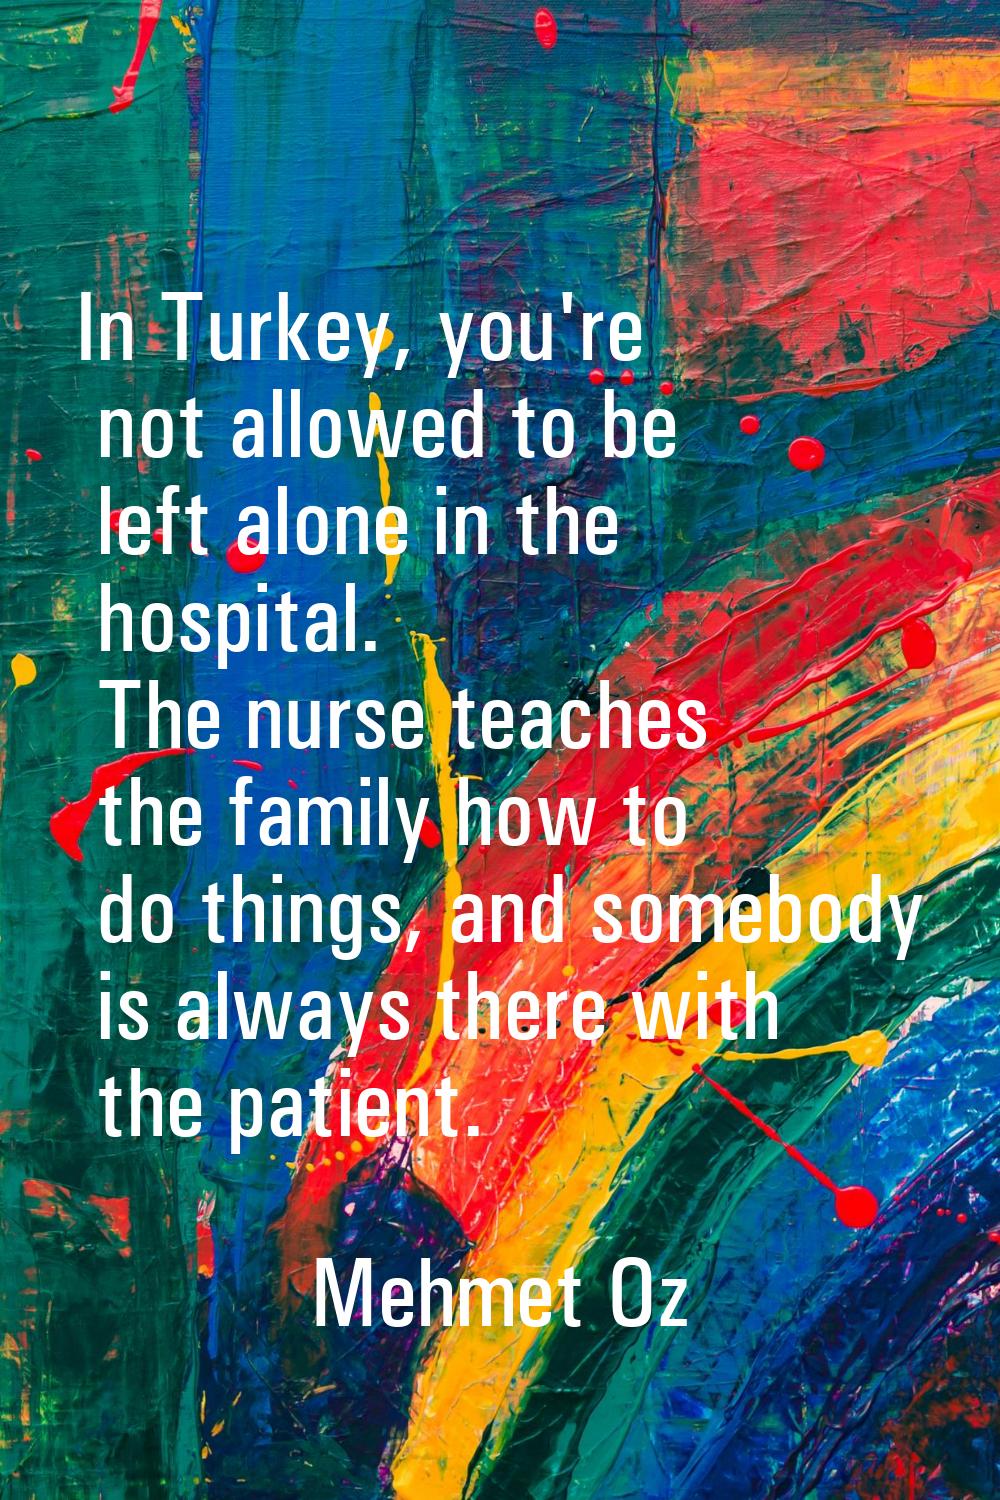 In Turkey, you're not allowed to be left alone in the hospital. The nurse teaches the family how to